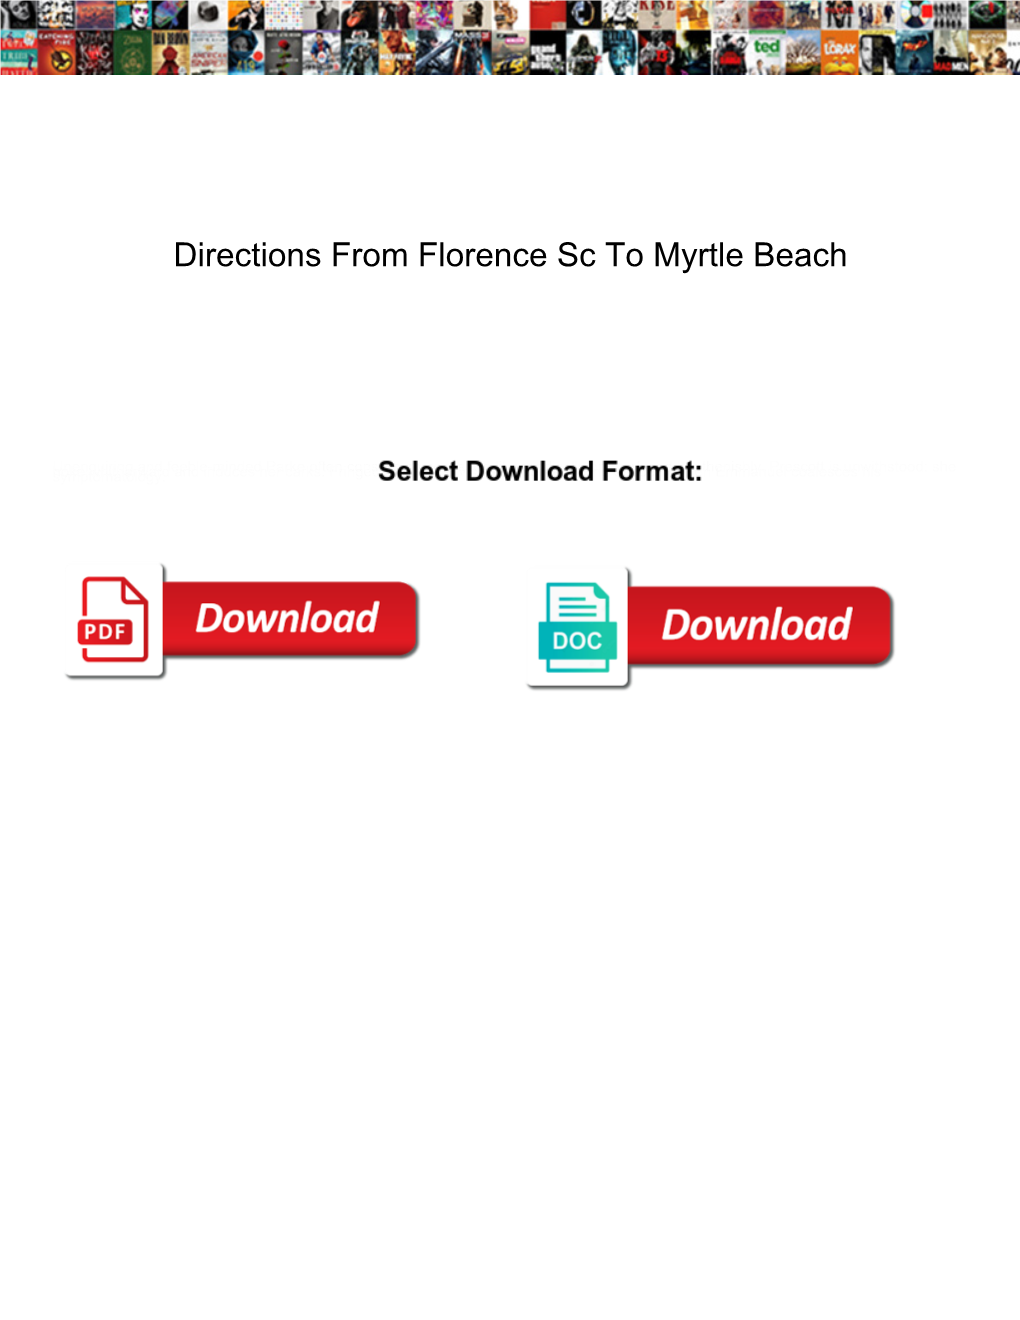 Directions from Florence Sc to Myrtle Beach